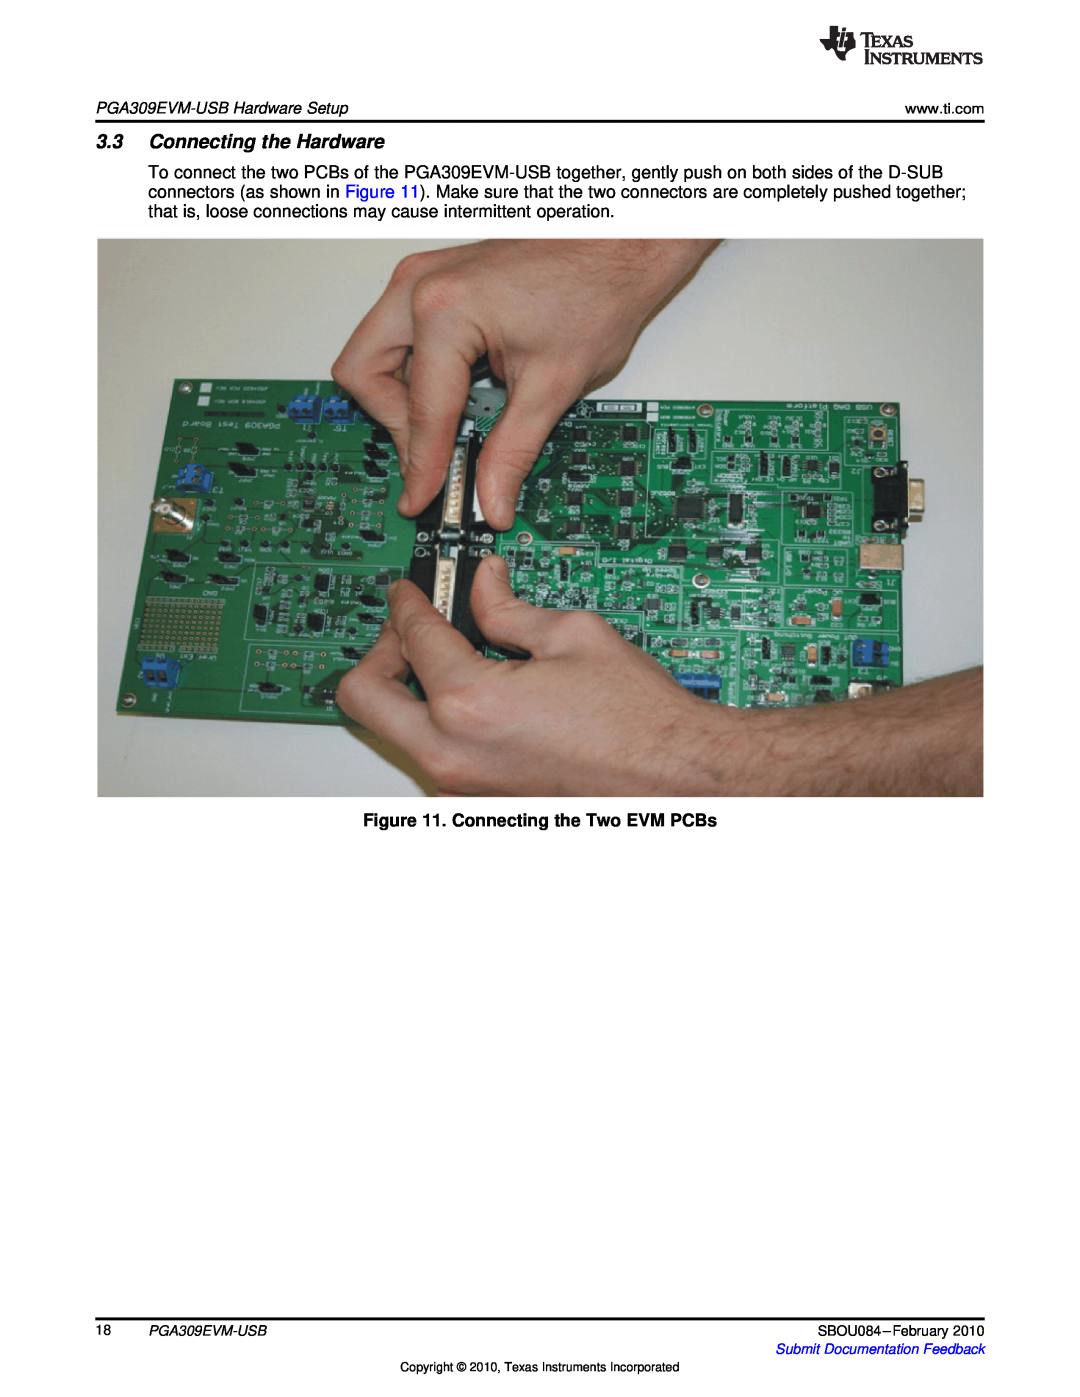 Texas Instruments PGA309EVM-USB manual Connecting the Hardware, Connecting the Two EVM PCBs 